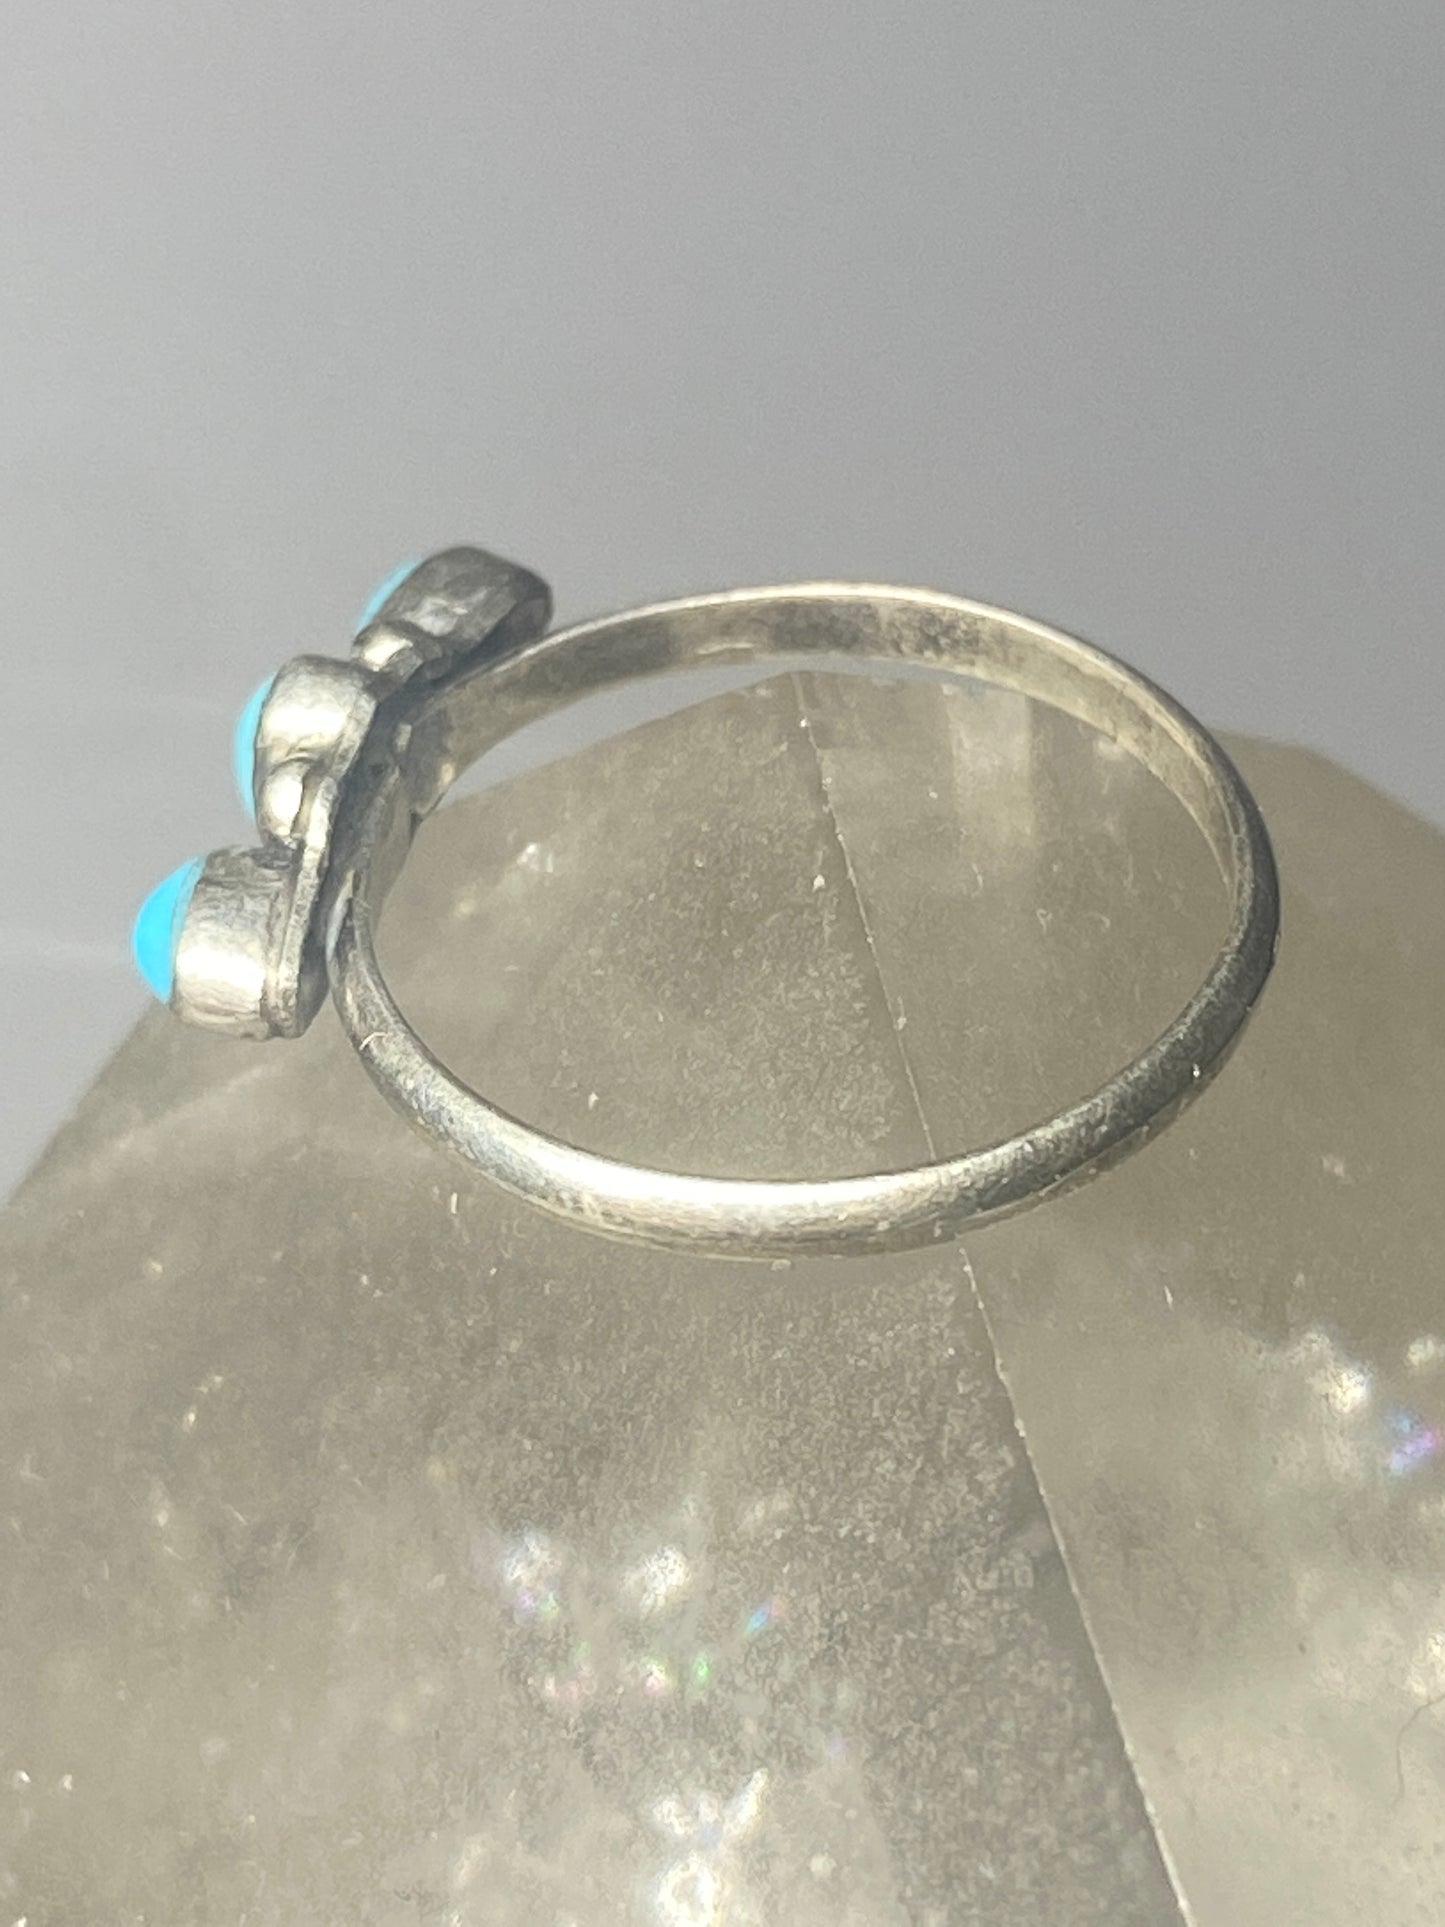 Turquoise ring stacker band southwest sterling silver women girls b